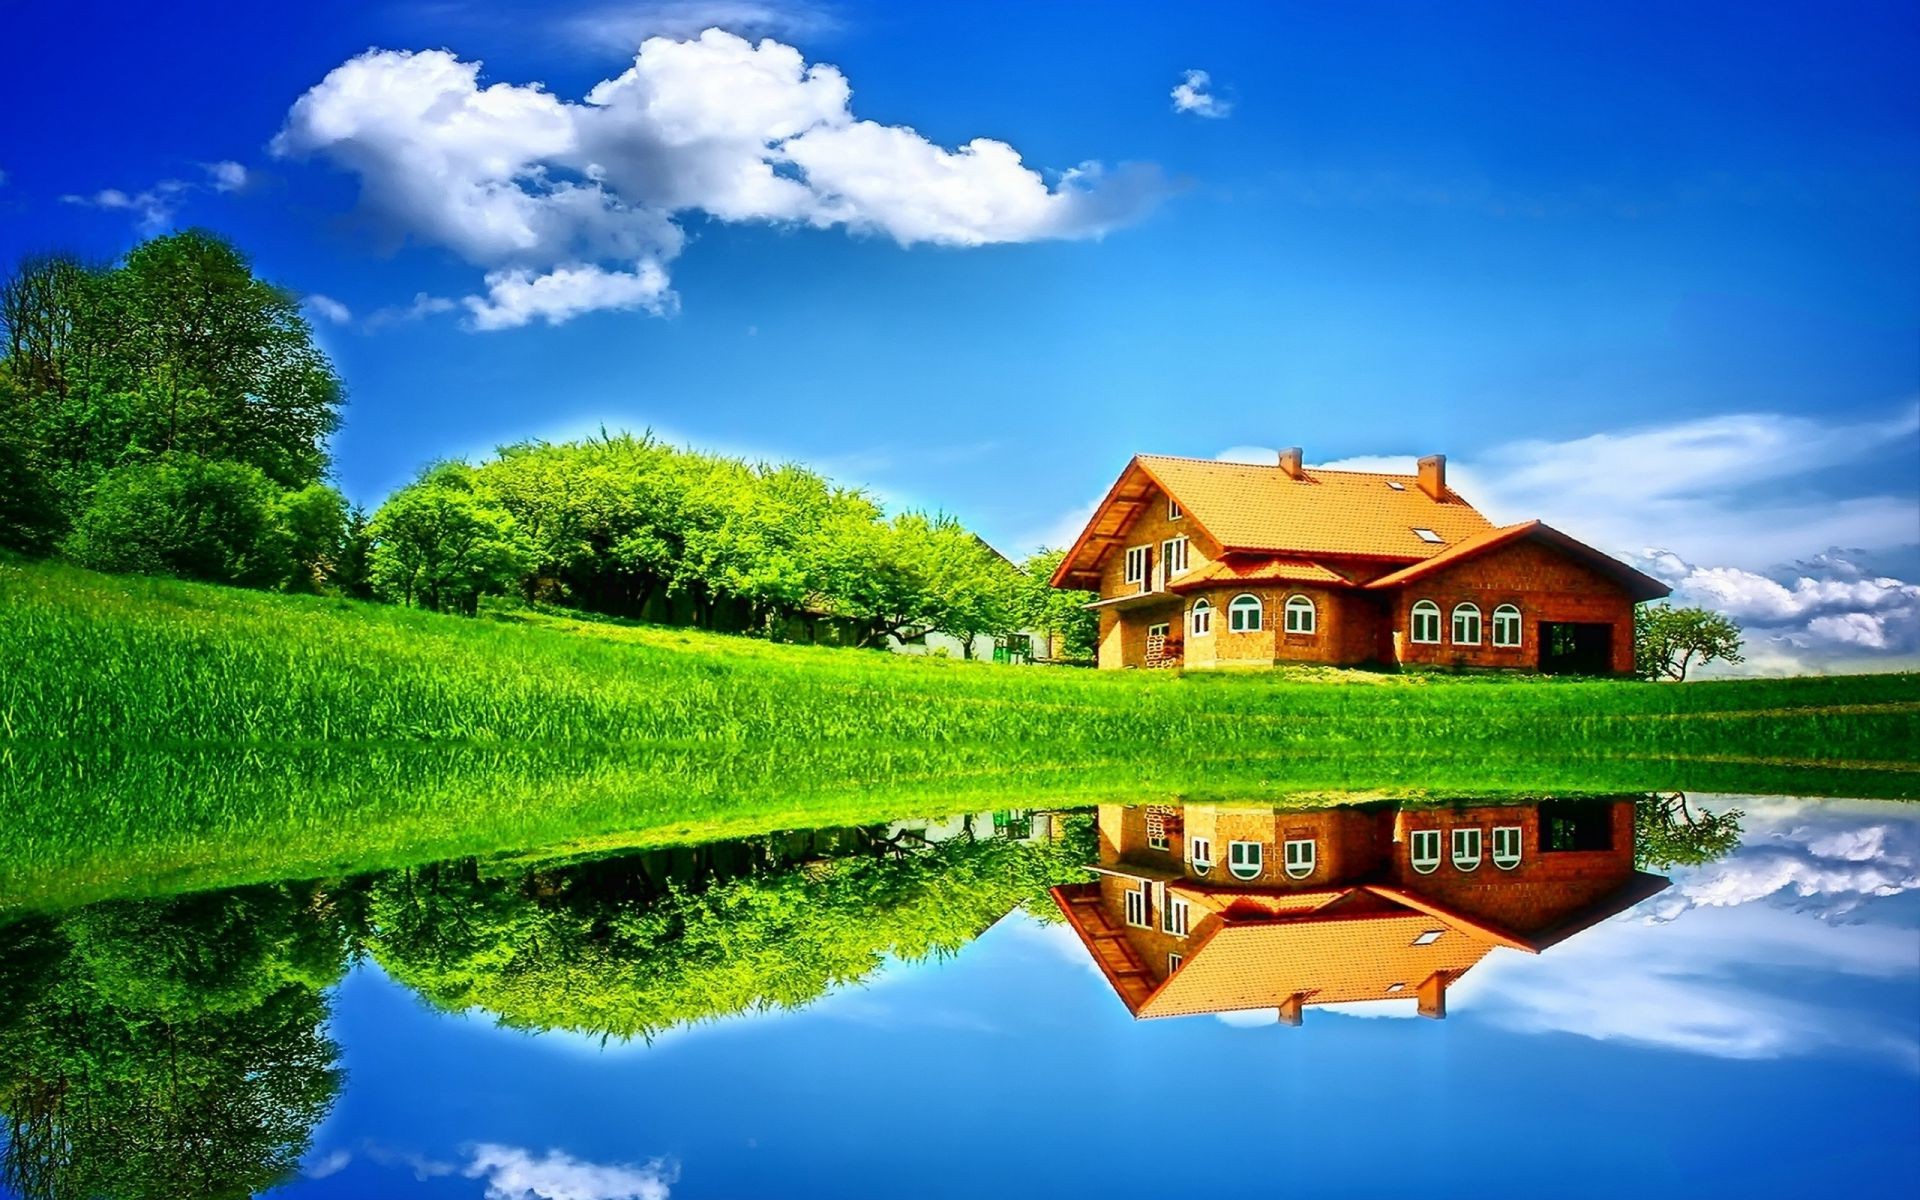 rivers ponds and streams outdoors nature house sky summer grass rural travel landscape